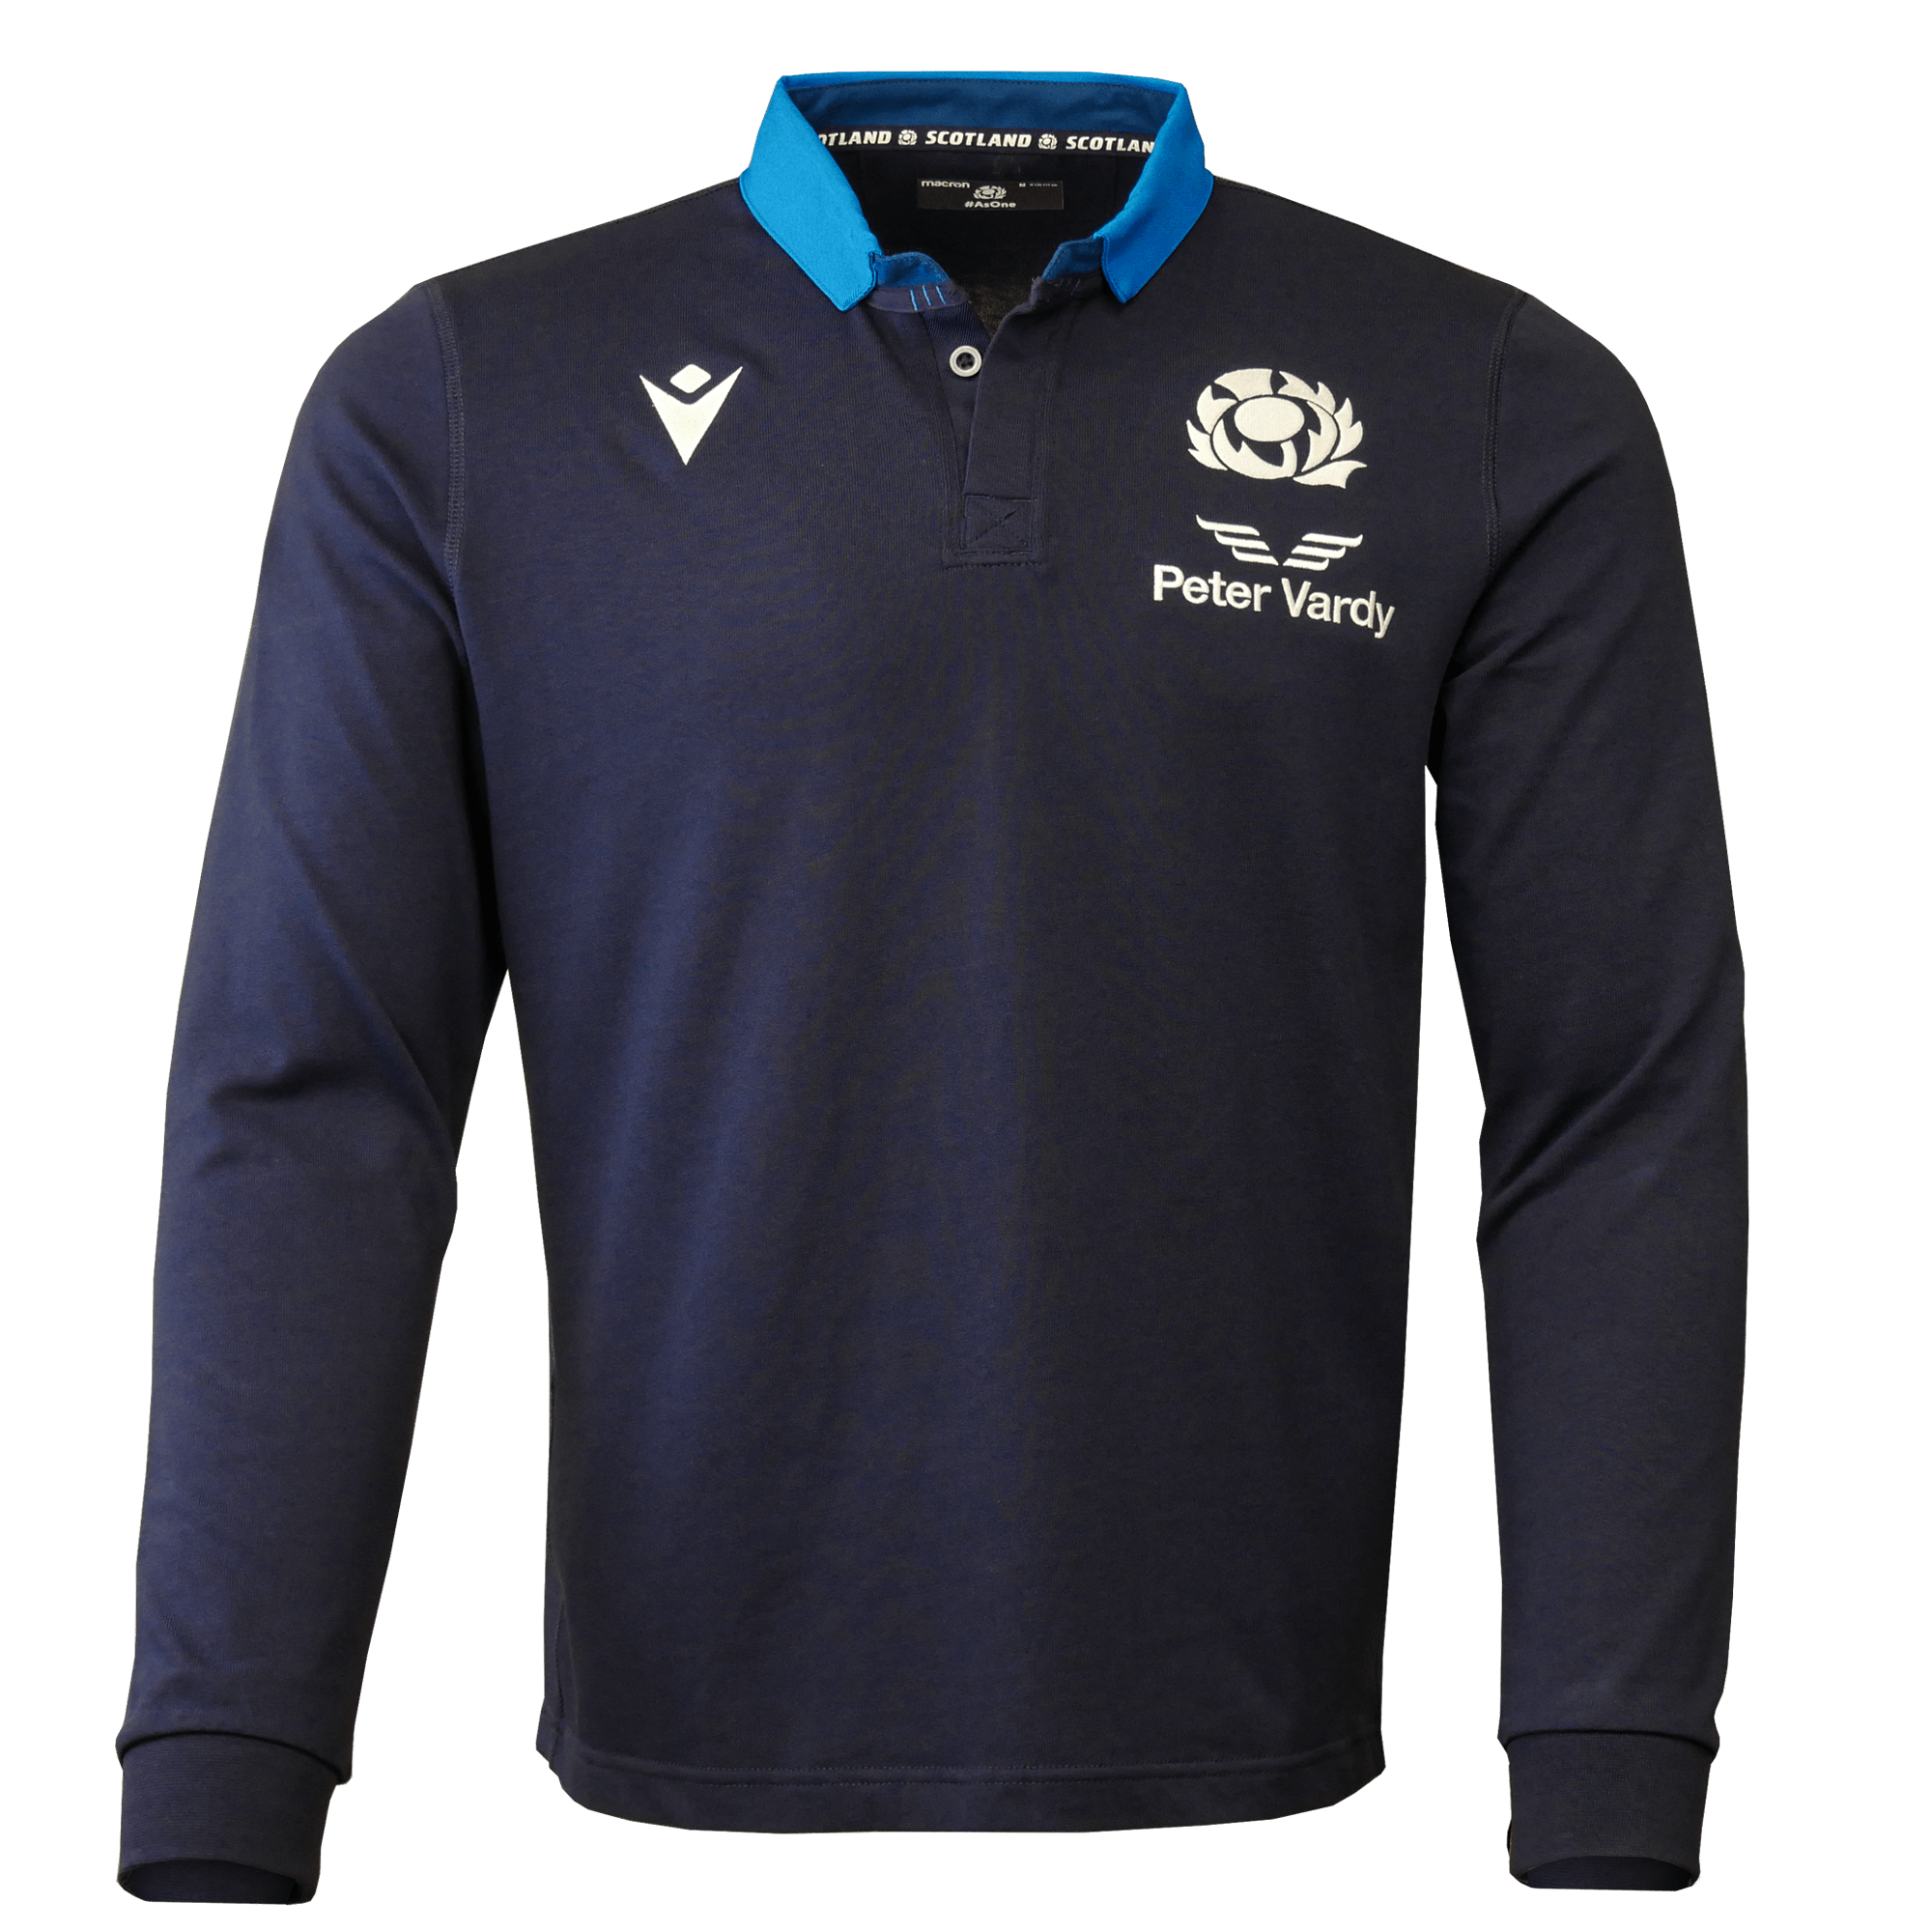 adidas Equipe de France Rugby Vintage Cotton Jersey Polo Shirt - 2 / S